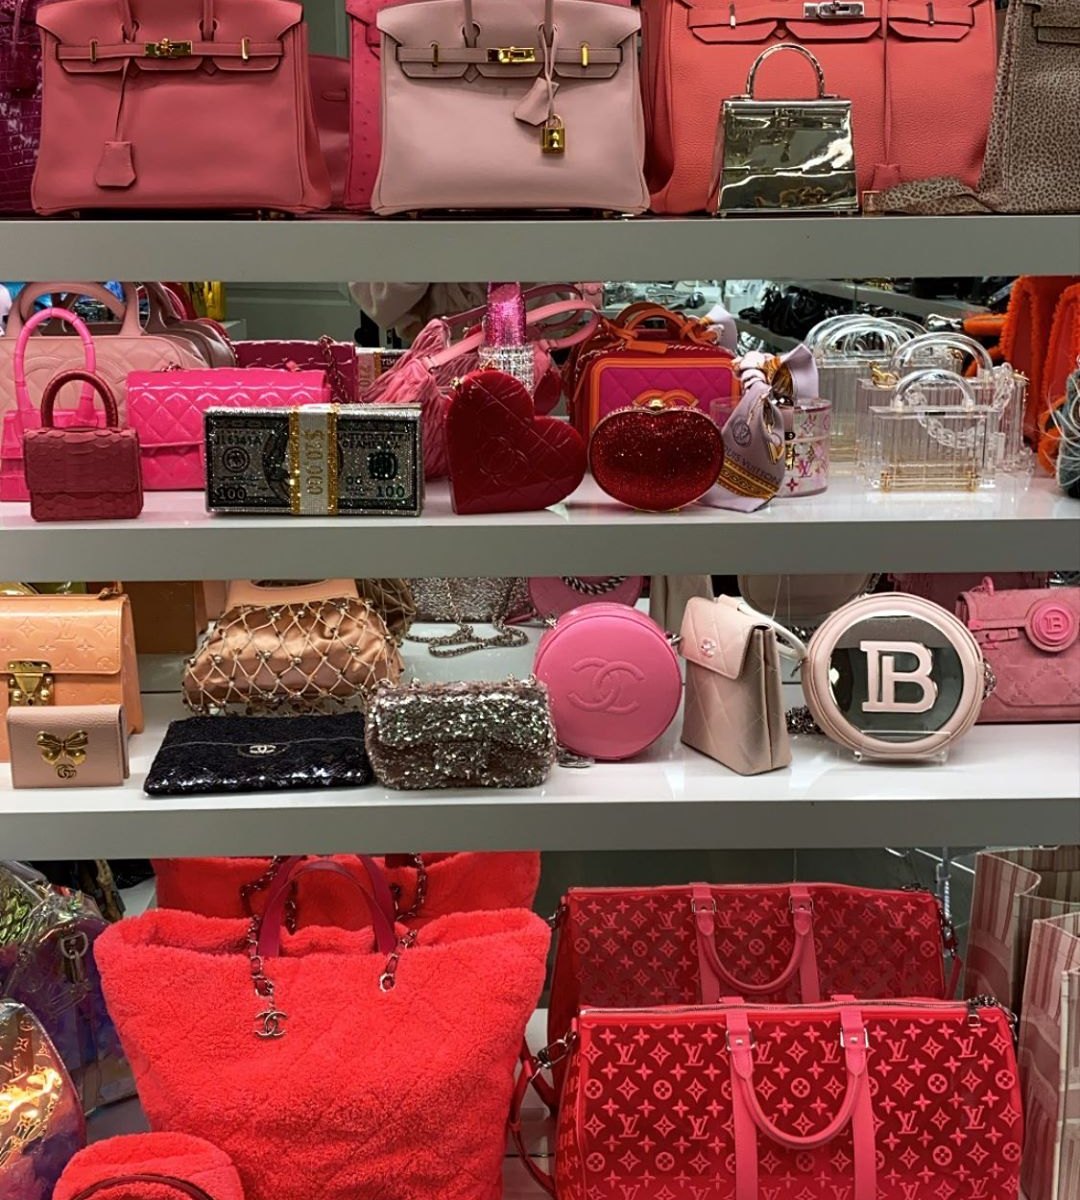 Kylie Jenner Pink Handbag Collection Estimated To Be Worth £92,000